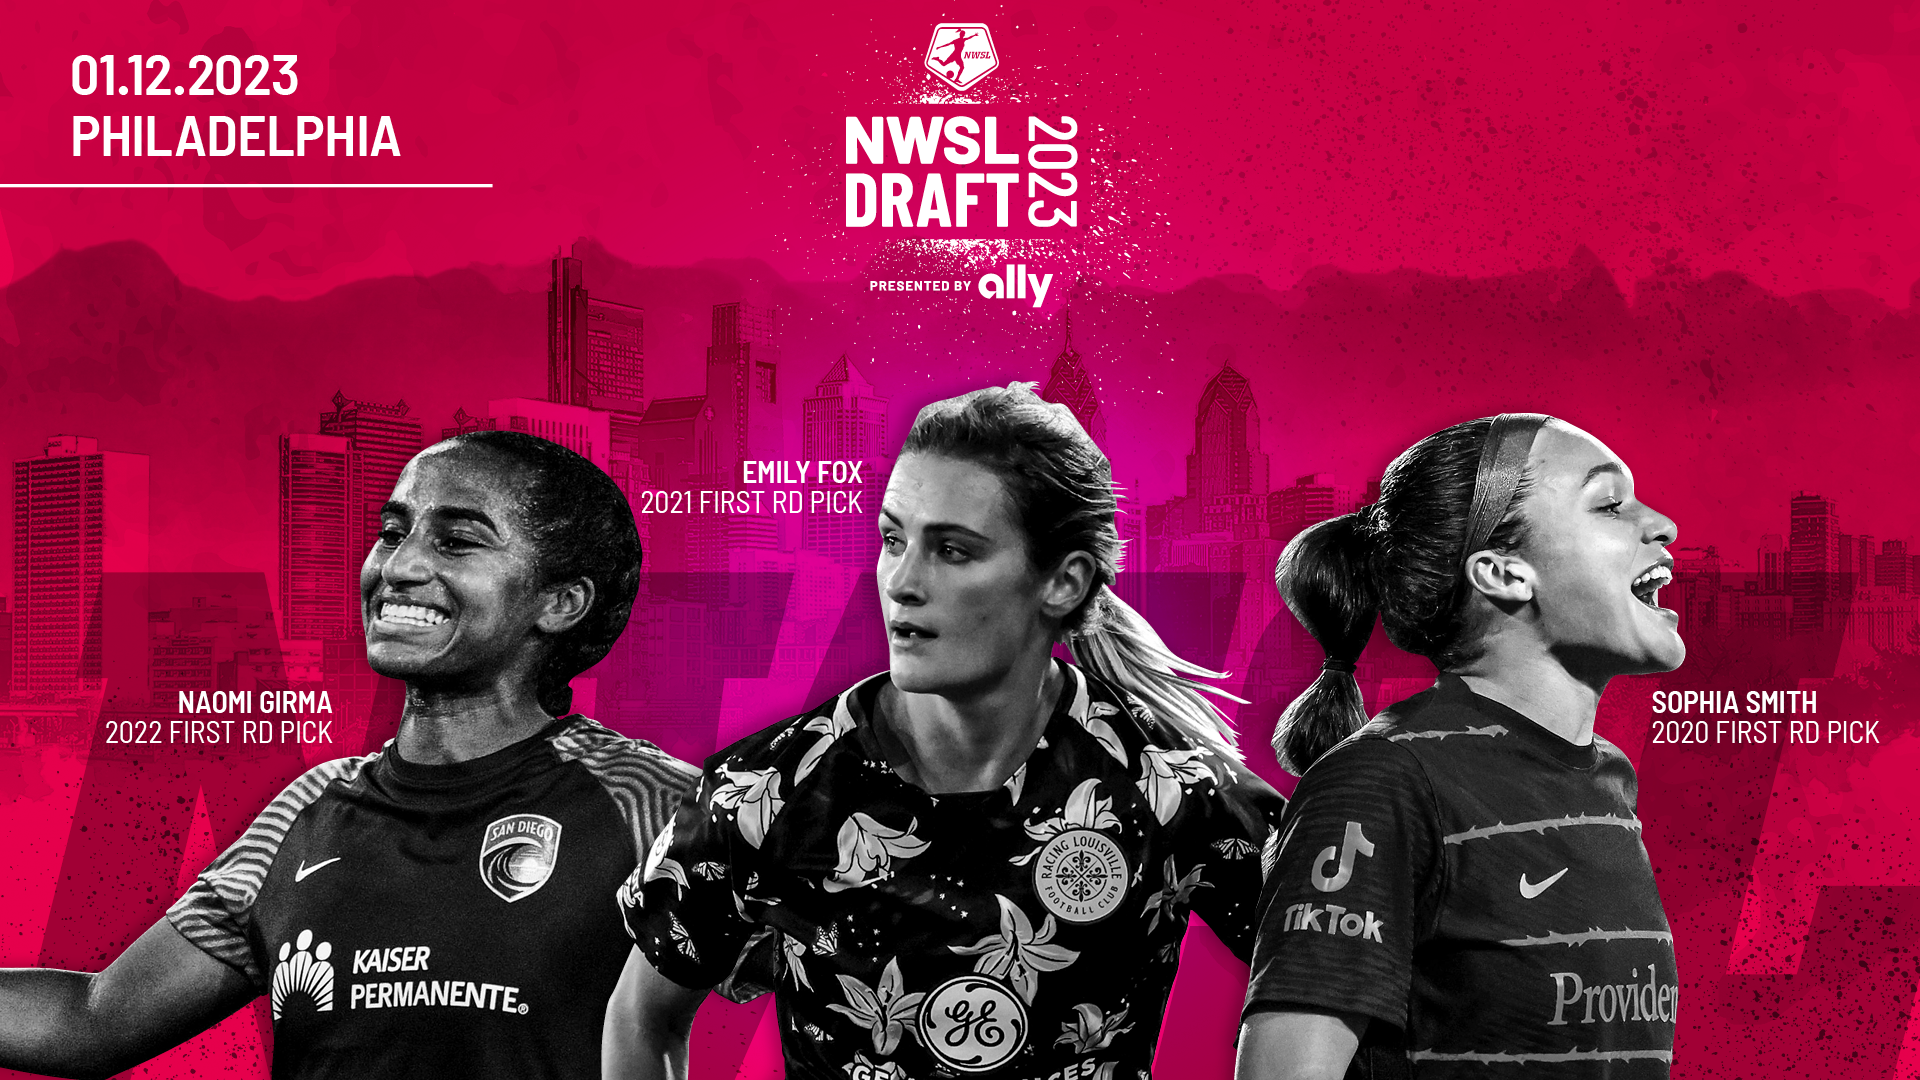 <strong>Philadelphia to Host 2023 NWSL Draft, Presented by Ally on January 12</strong> Featured Image